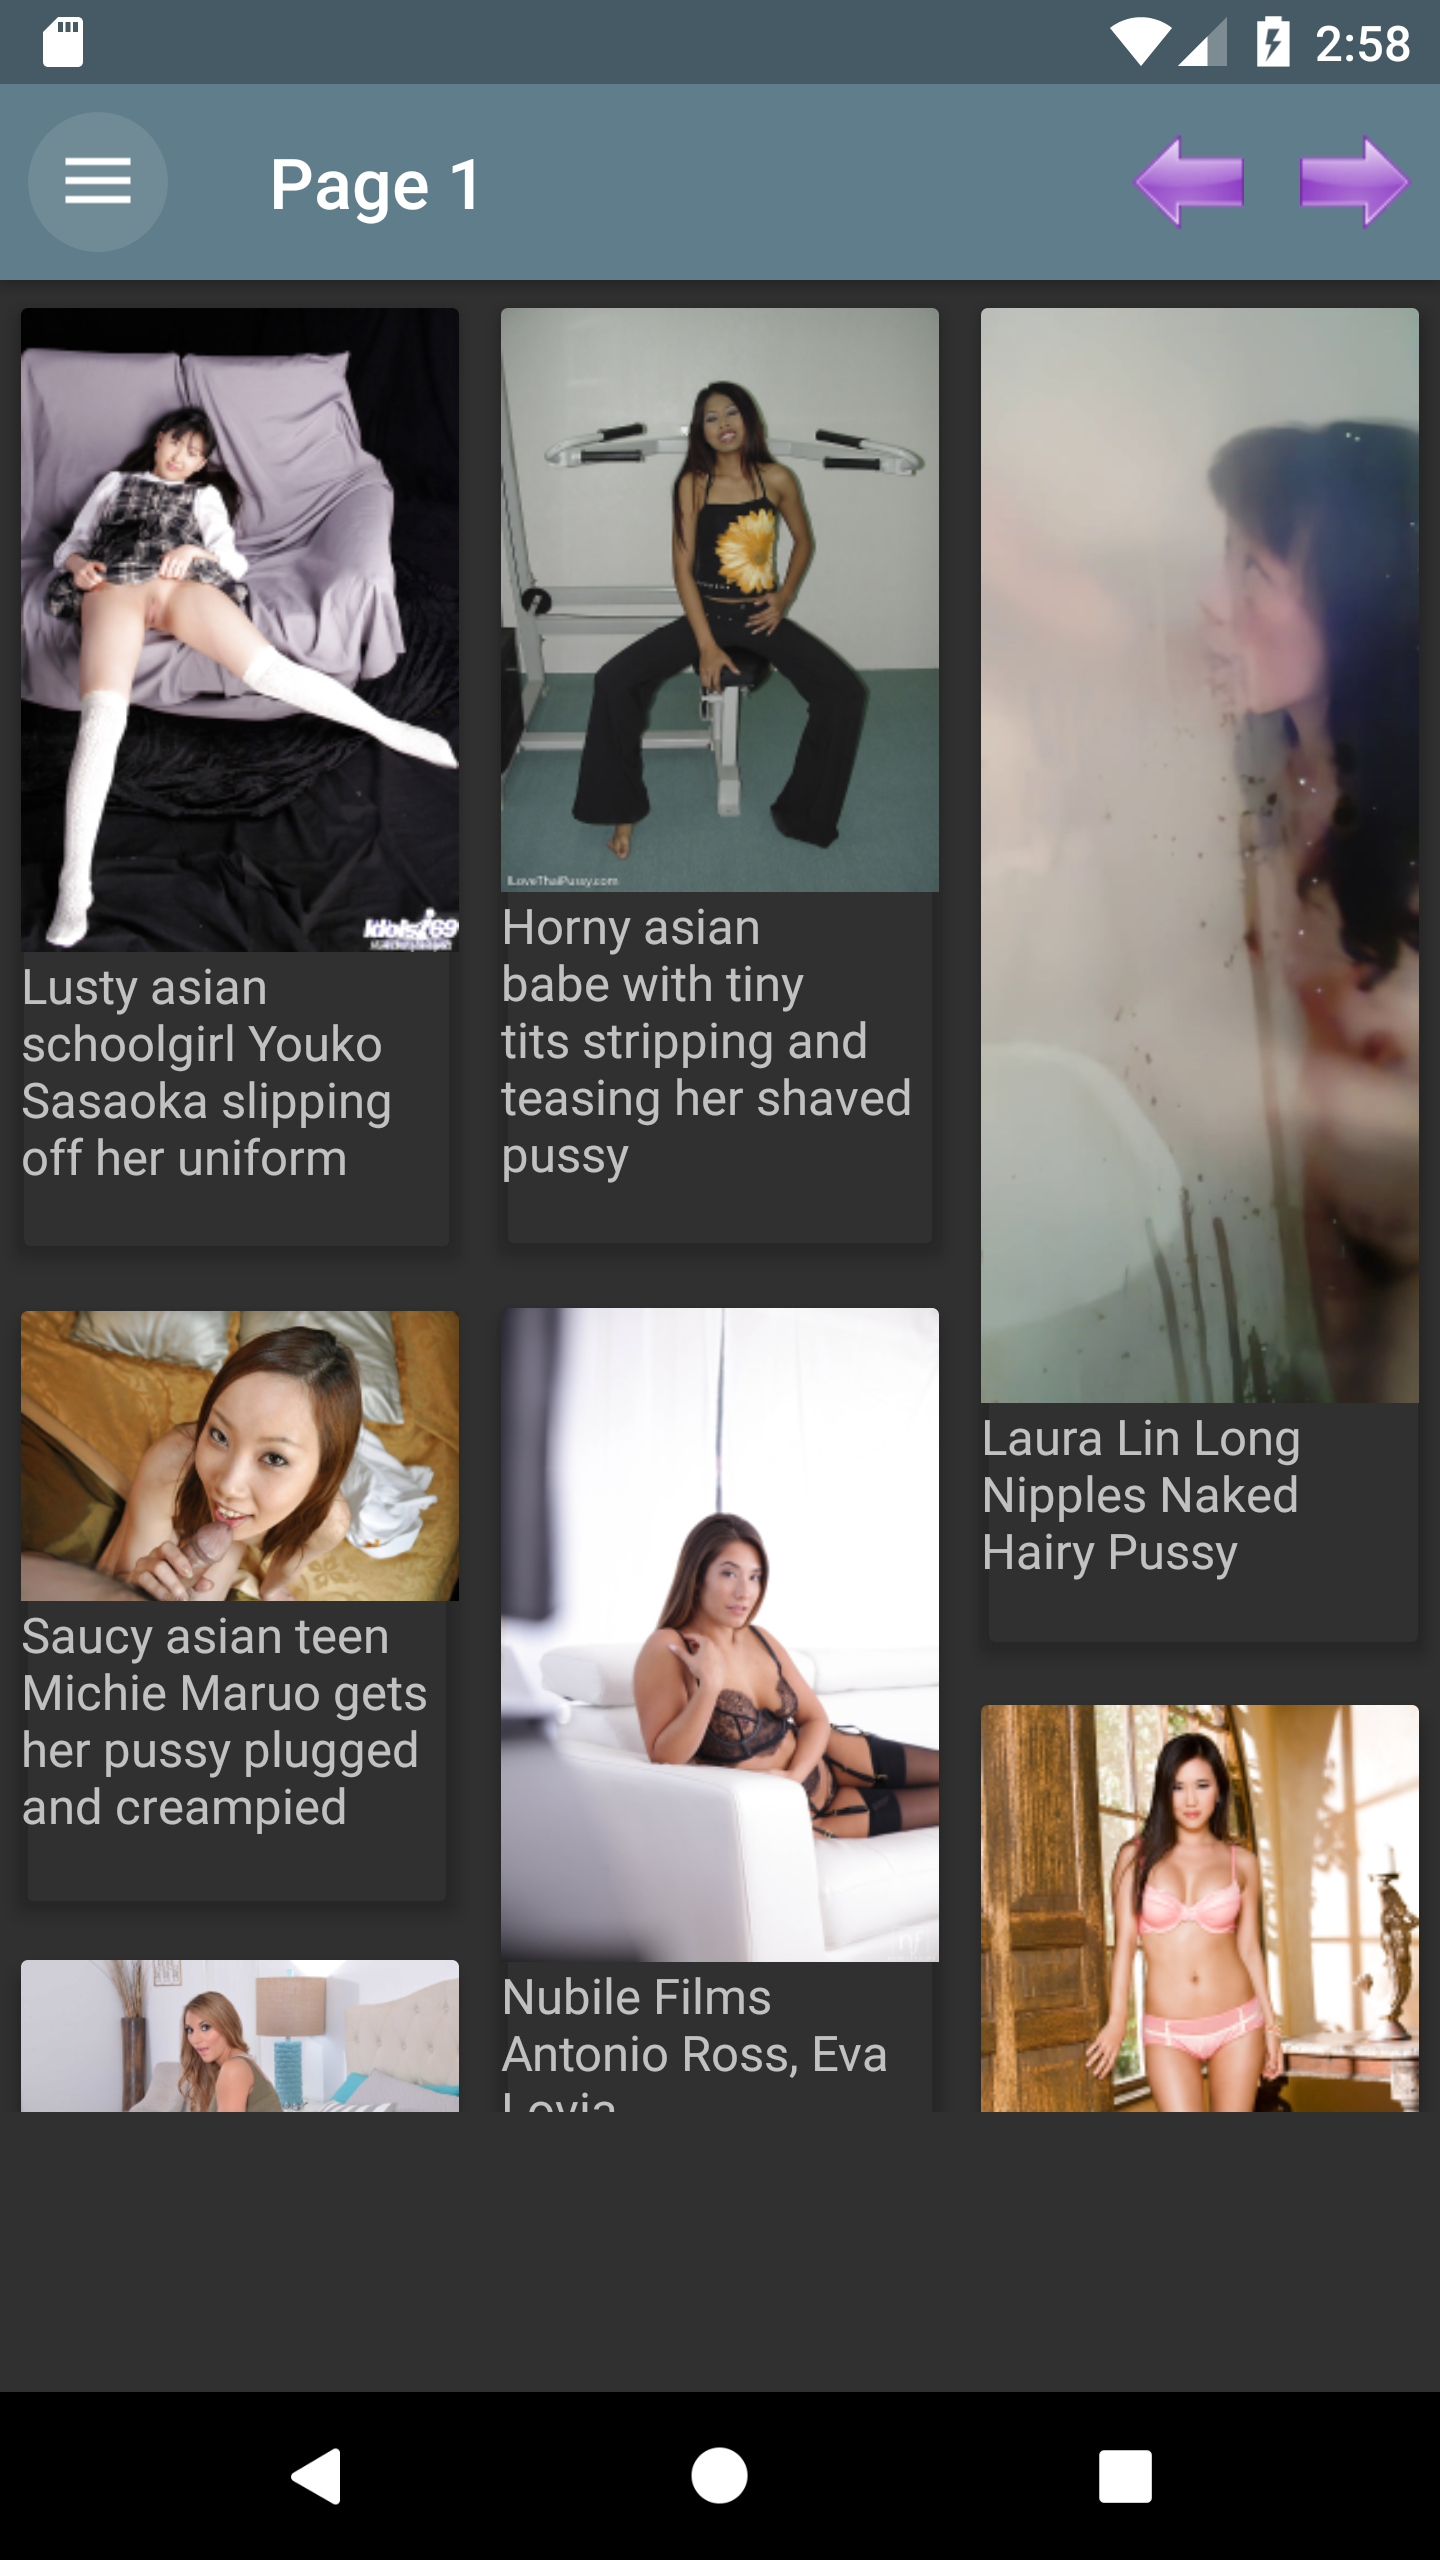 Asian top,apps,hentai,xxx,pictures,app,gallery,pornstars,hantai,sexy,pics,adultwallpapers,galleries,lane,apk,picturd,free,lily,porn,hot,henatai,hntai